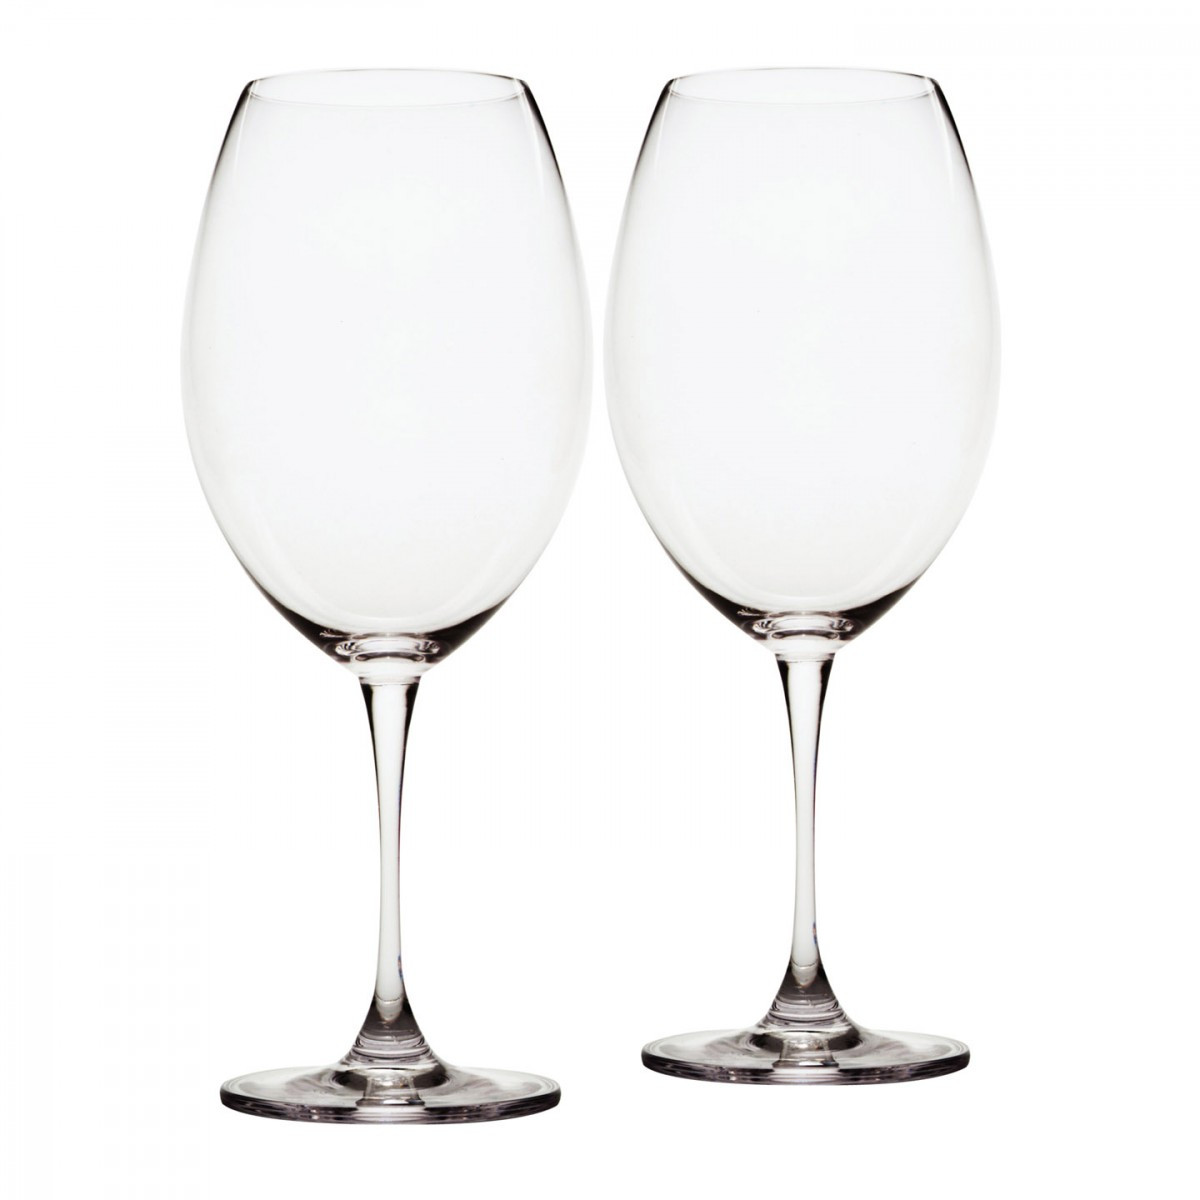 25 attractive Marquis by Waterford Shelton Vase 12 2024 free download marquis by waterford shelton vase 12 of robert mondavi bordeaux pair discontinued robert mondavi by pertaining to robert mondavi bordeaux pair discontinued